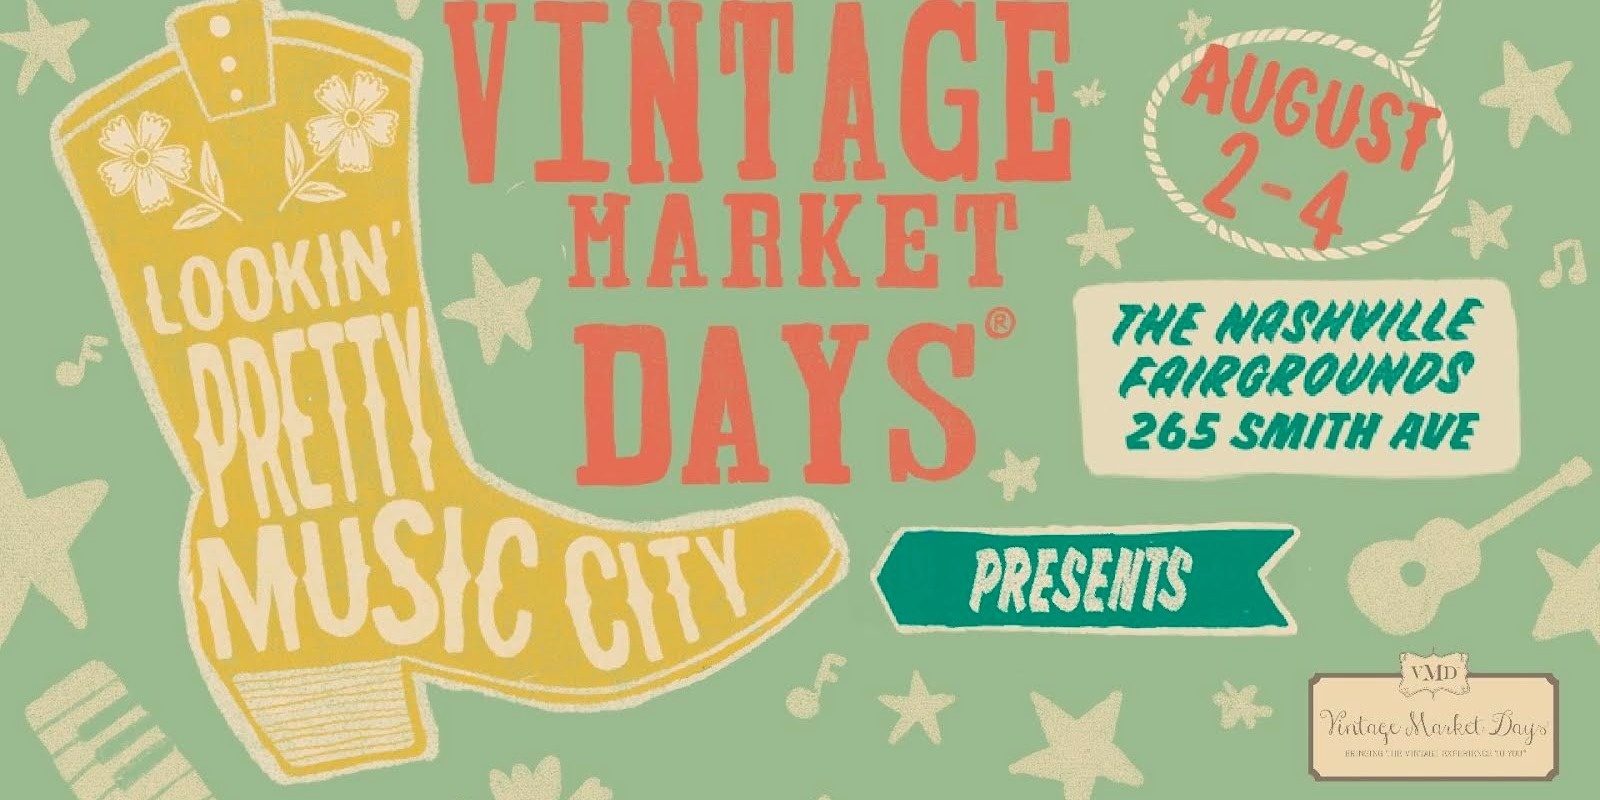 Banner image for  Vintage Market Days® of Nashville presents - "Lookin Pretty Music City"